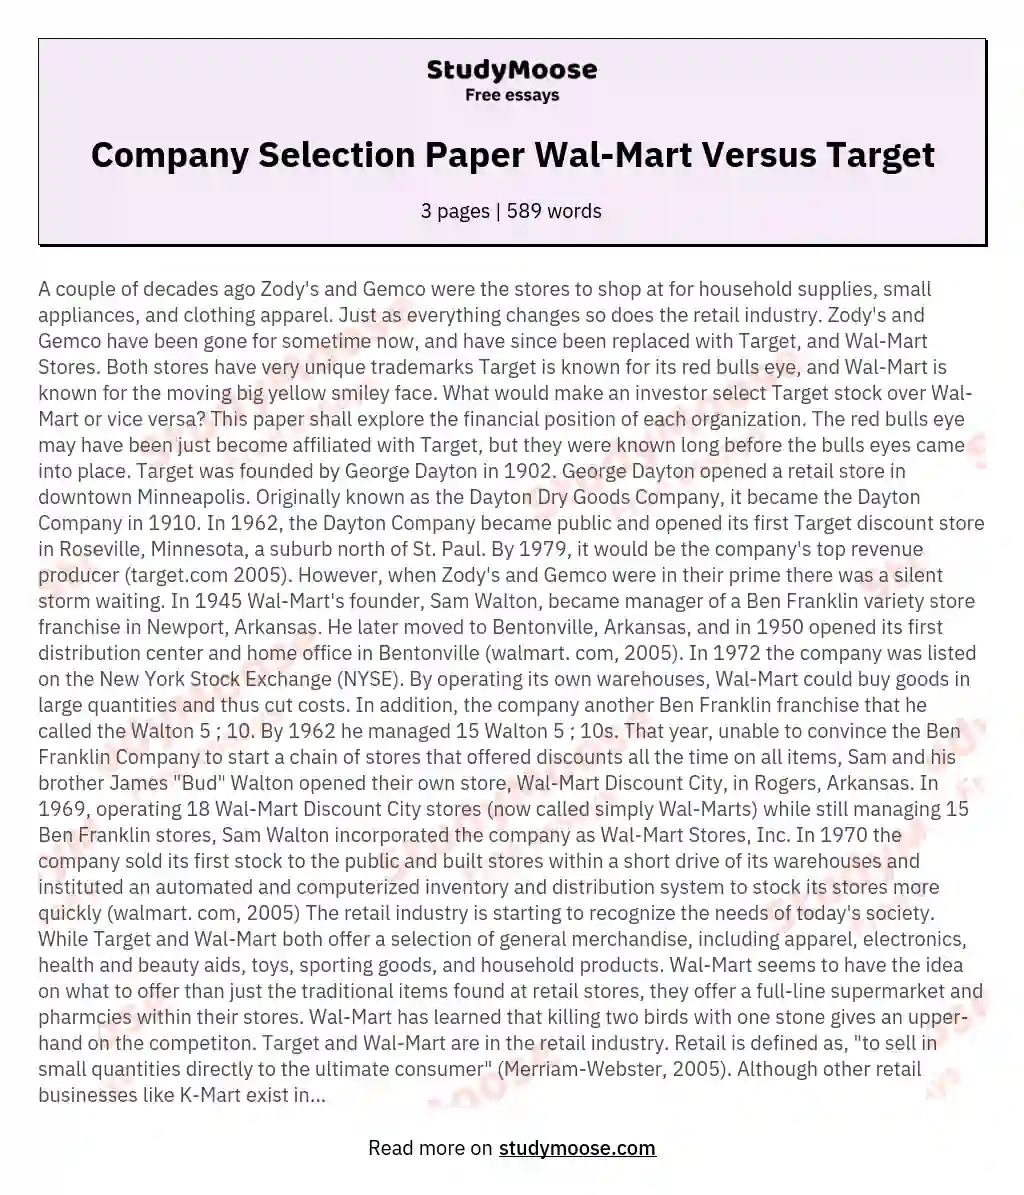 Company Selection Paper Wal-Mart Versus Target essay